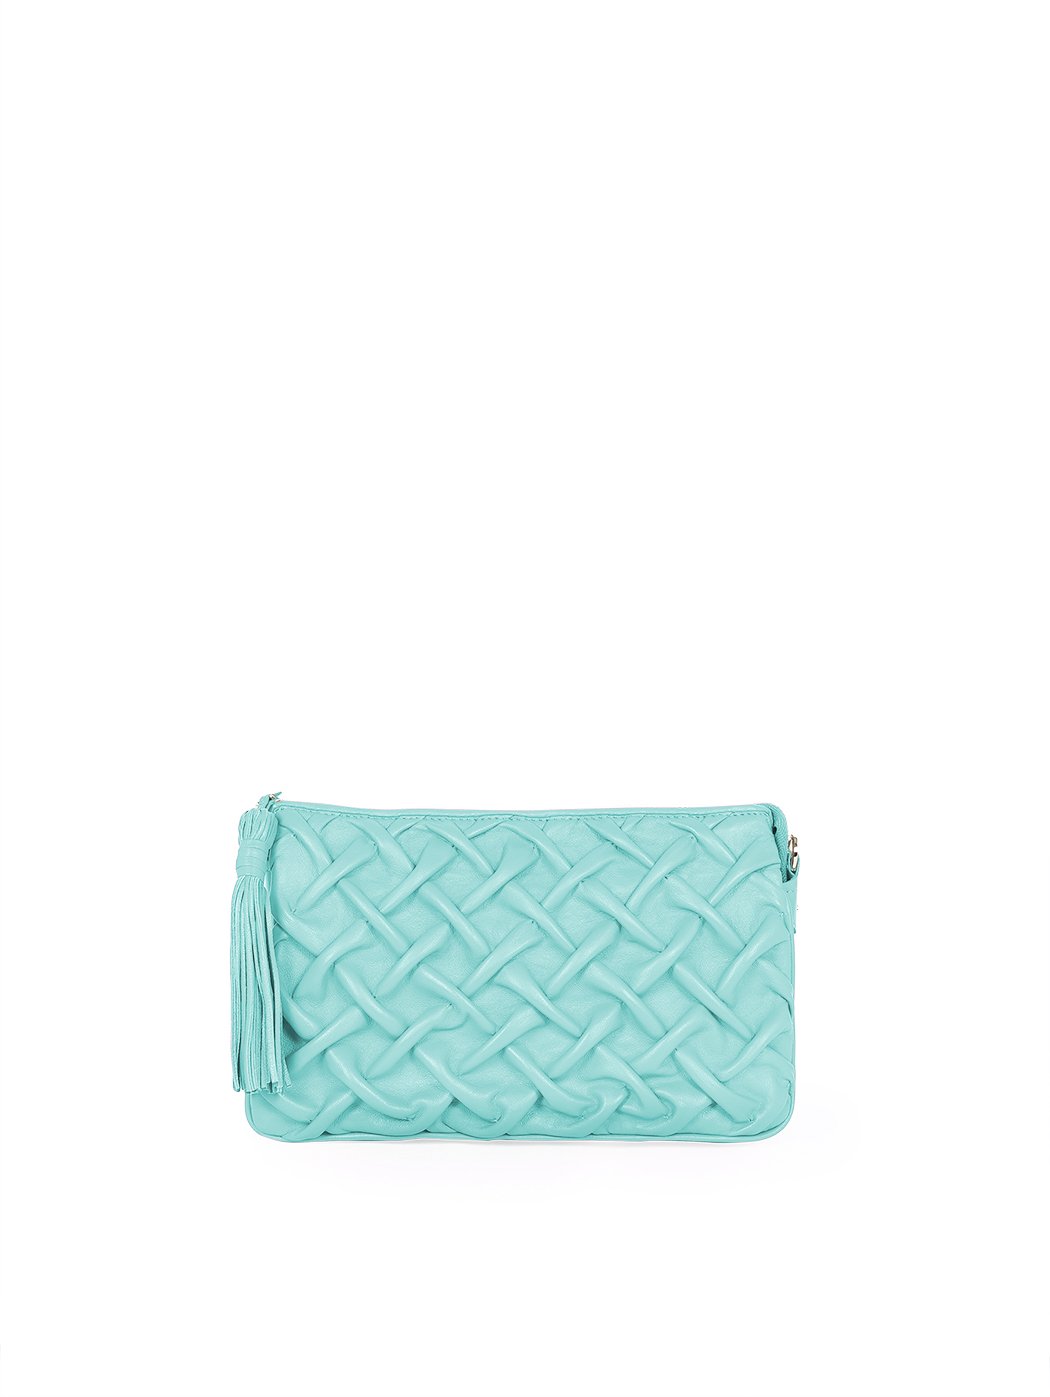 Quilted Weave Leather Accordion Crossbody Bag Aqua Blue